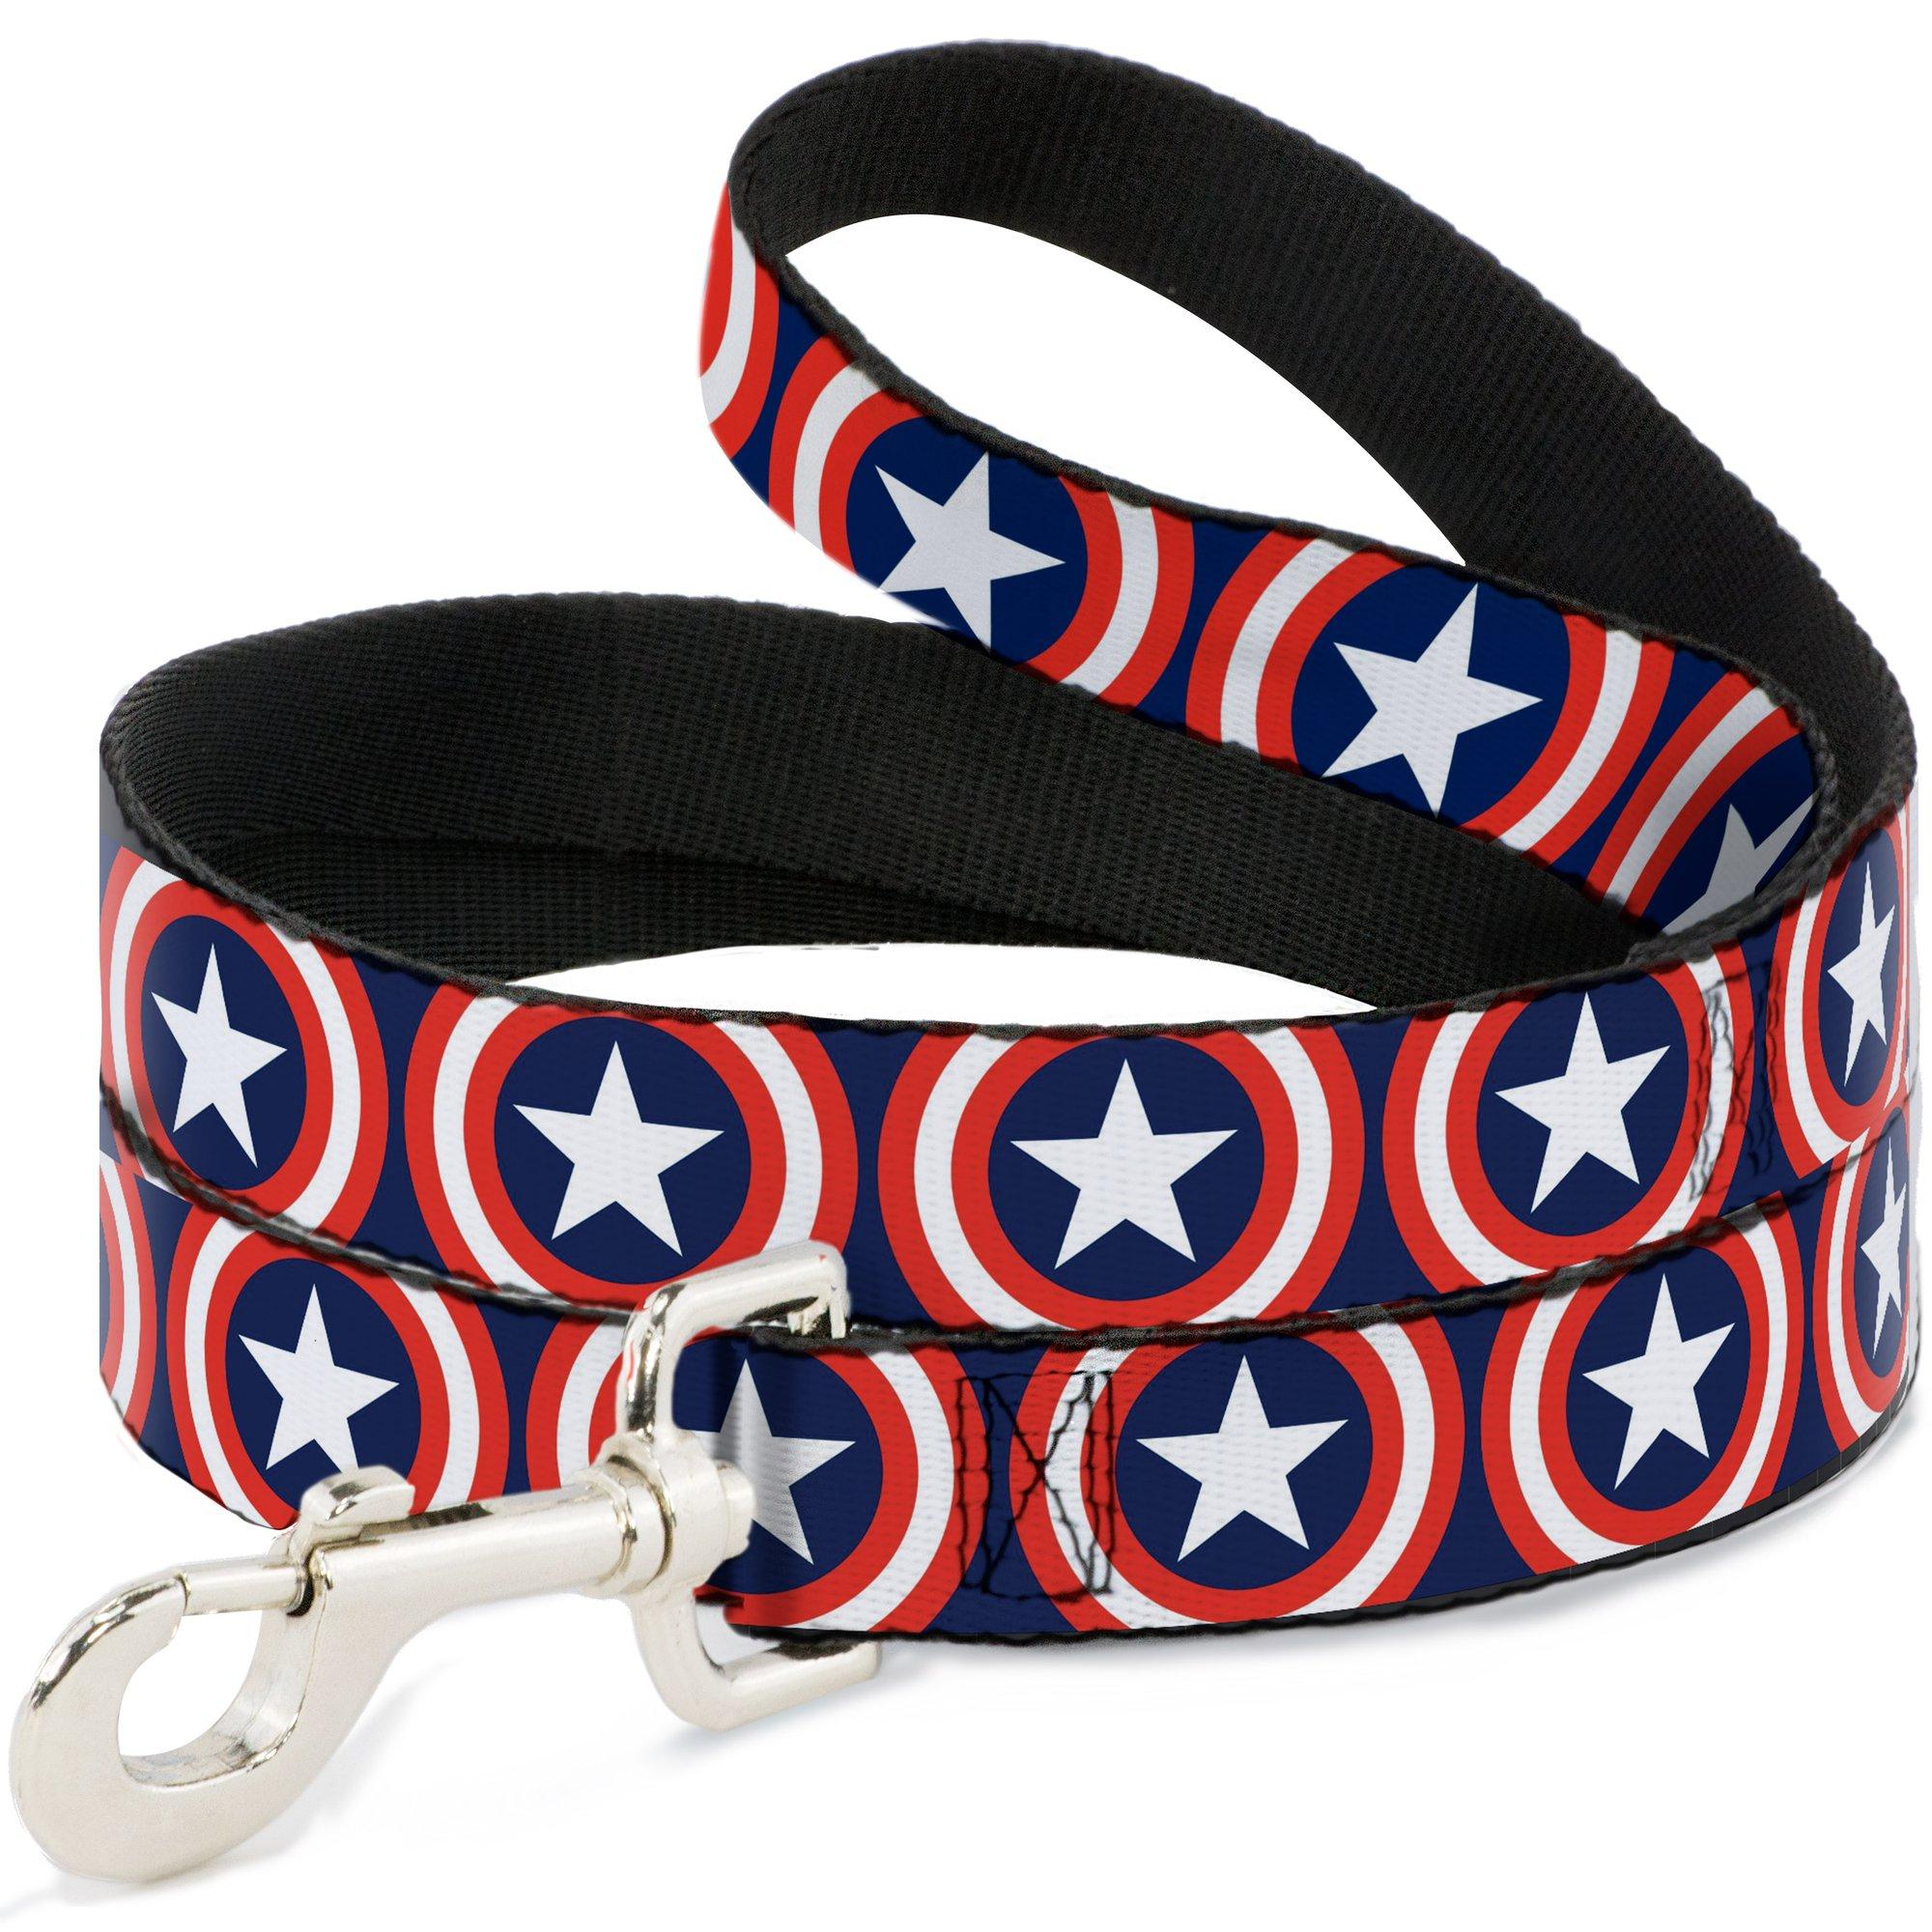 Captain America Shield Dog Leash by Buckle-Down - Navy